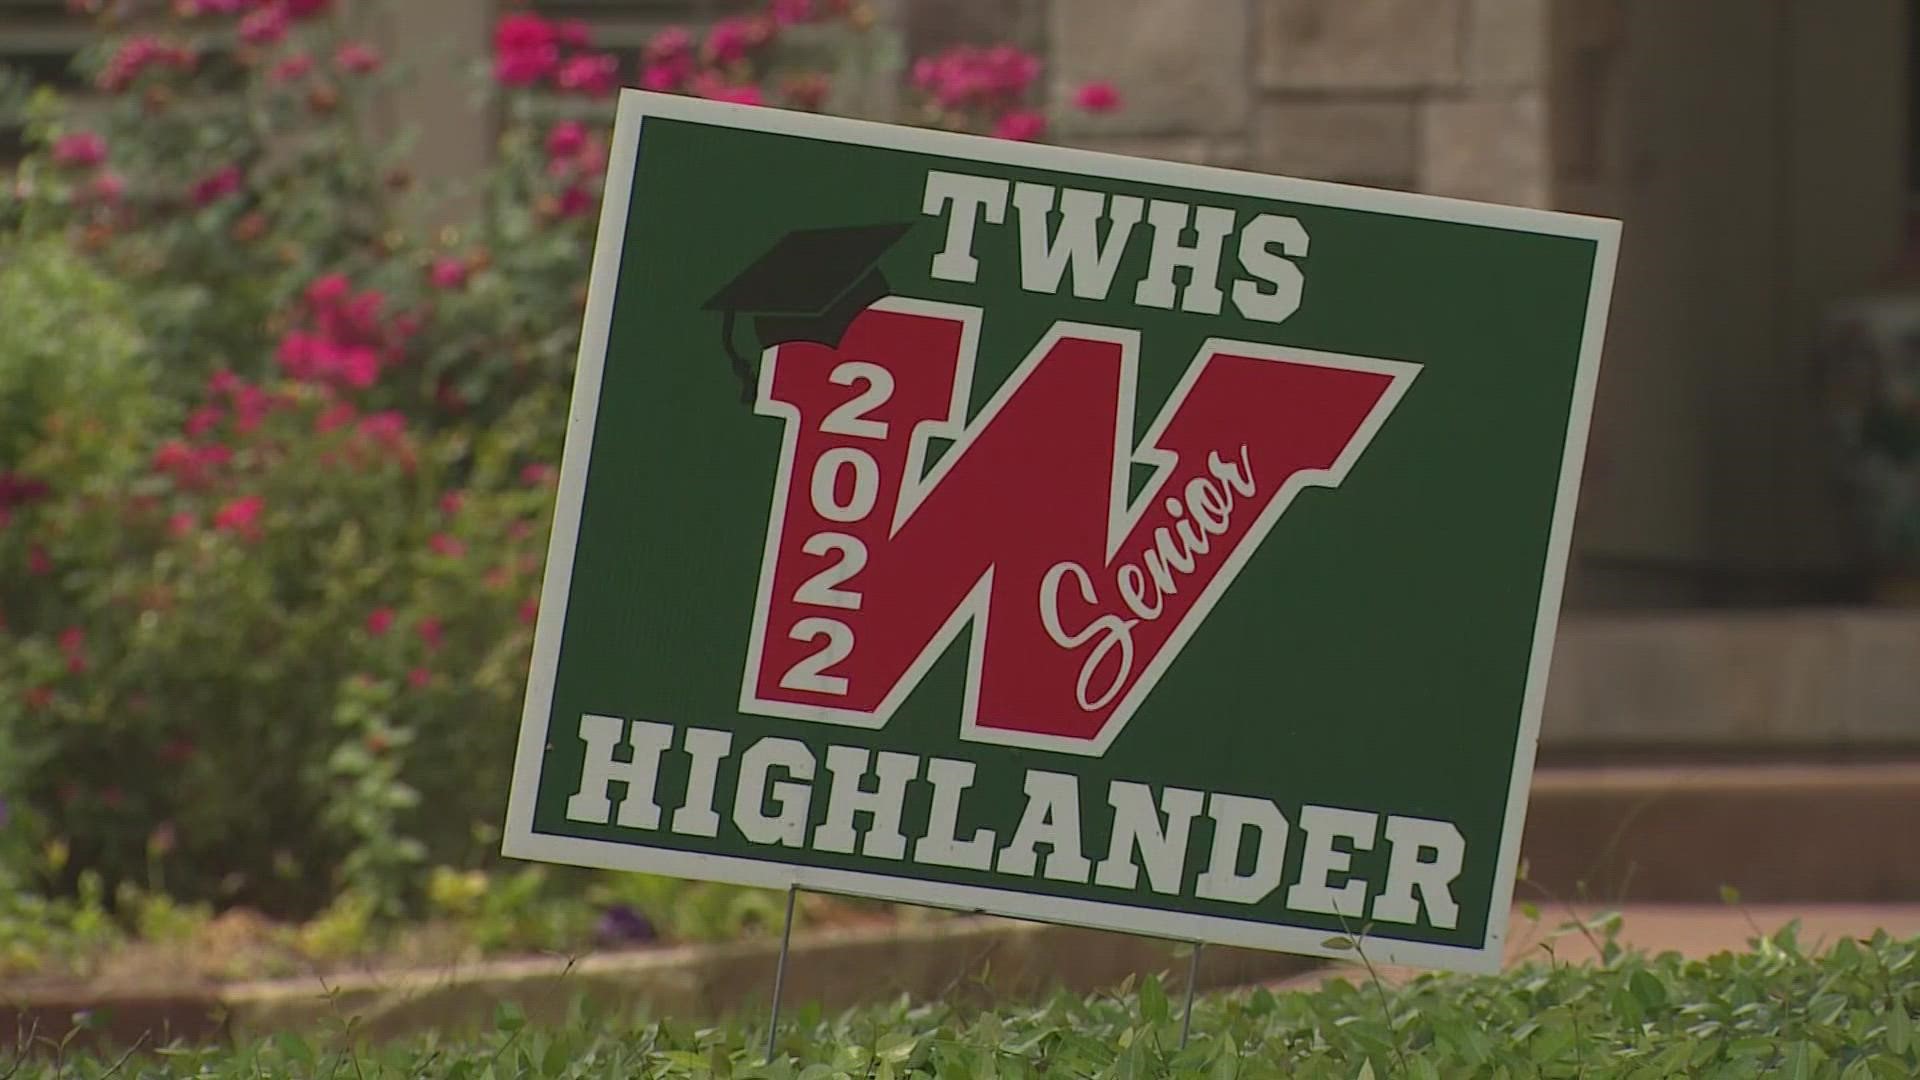 An autopsy has revealed that two Woodlands High School seniors had fentanyl in their systems when they died earlier this month.